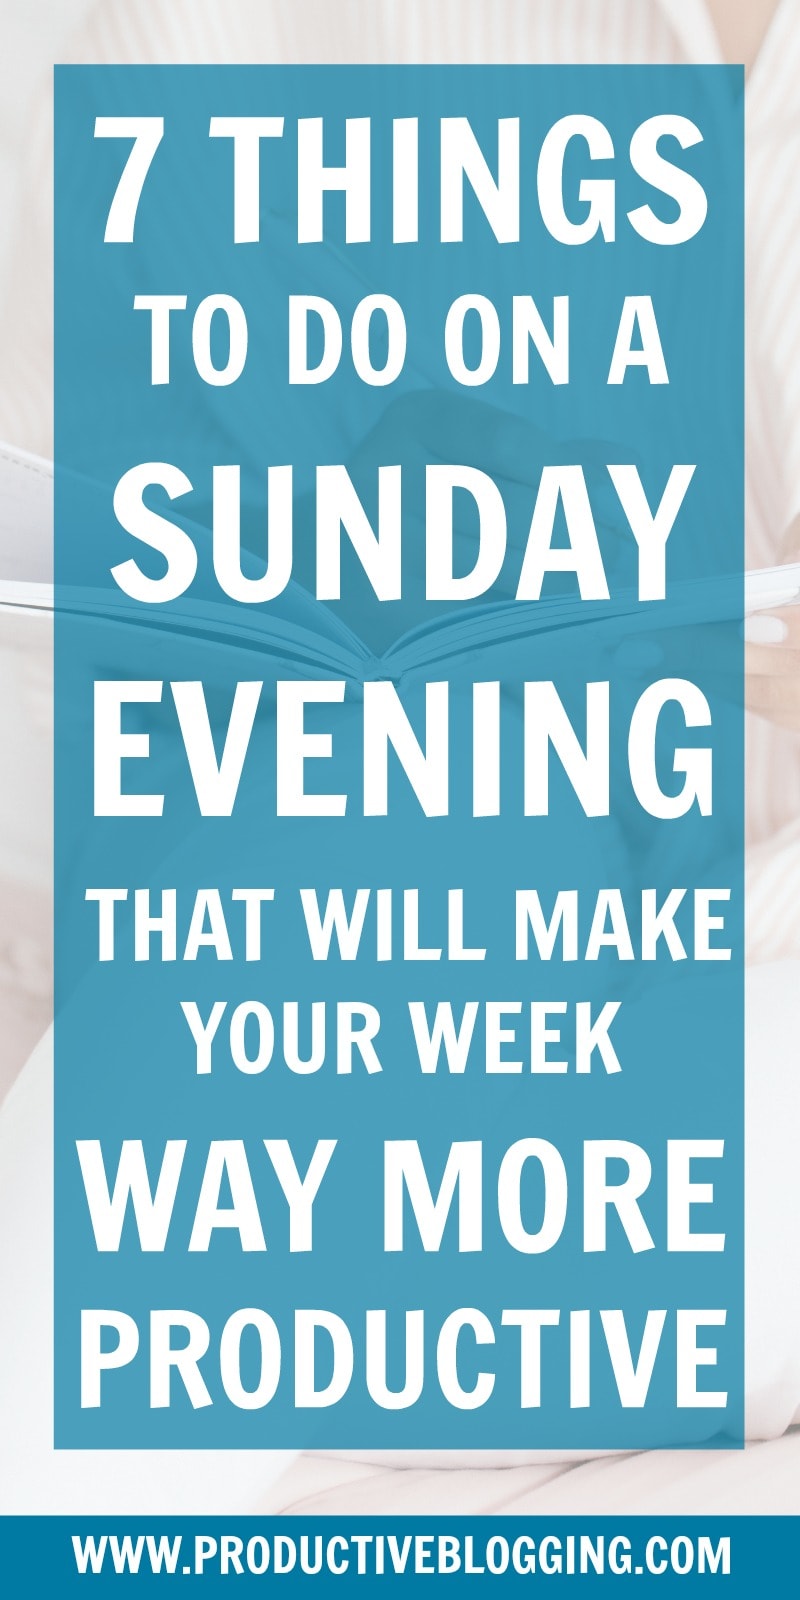 Set your week up for success! Do these 7 things on a Sunday evening and have your most productive week EVER! #productivity #timemanagement #productivitytips #productivityhabits #productivityhacks #sundayhabits #sundayproductivityhabits #todolist #lifeadmin #weeklytodolist #dailytodolist #bloggingtips #blogginghacks #productiveblogger #solopreneur #mompreneur #businessowner #savvybusinessowner #mycreativebiz #beyourownboss #seizetheday #makeithappen #tipoftheday #timesavingtip #productiveblogging